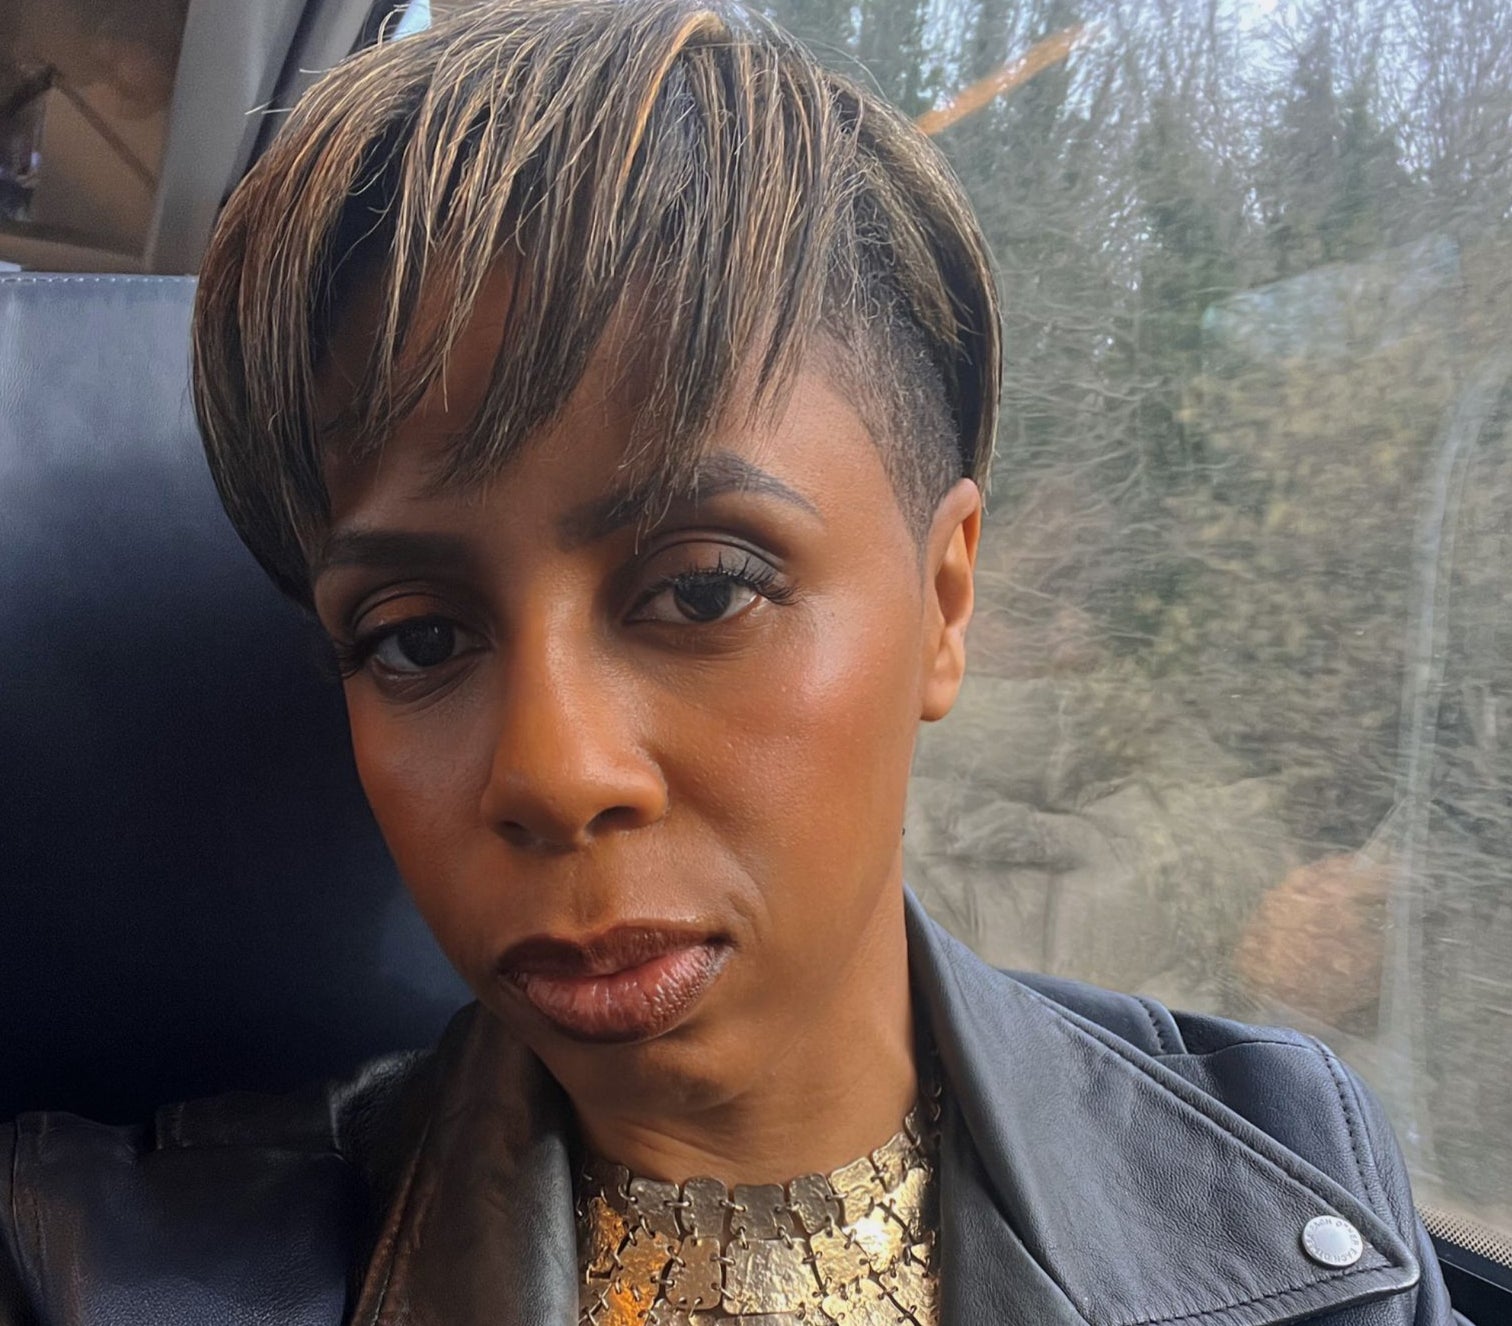 “I was racially profiled. Tesco - and all supermarkets - need to look at how they treat Black people when they come into the store, that the system has to change”